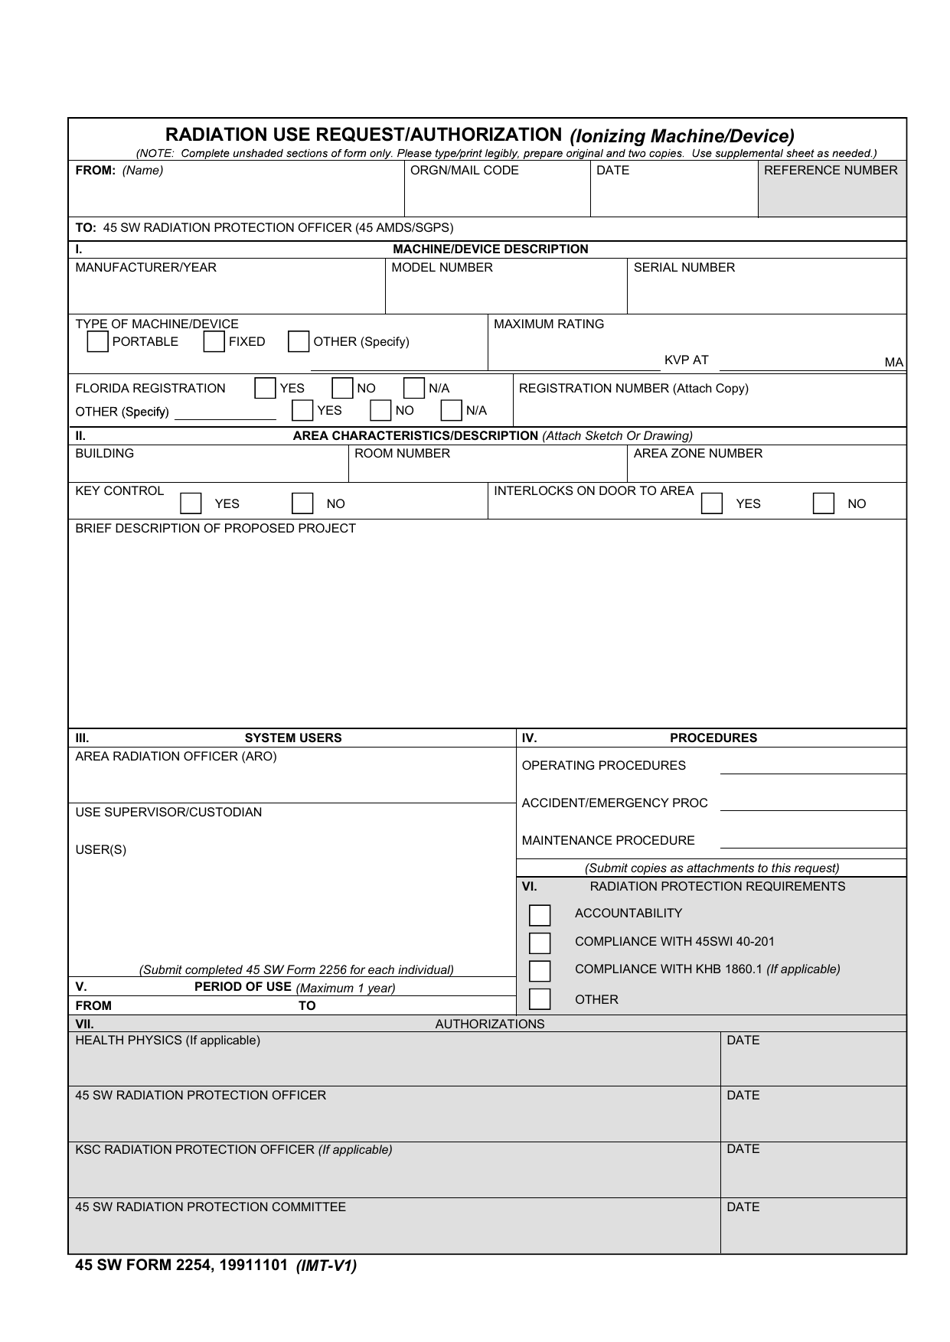 45 SW Form 2254 Radiation Use Request/Authorization (Ionizing Machine/Device), Page 1